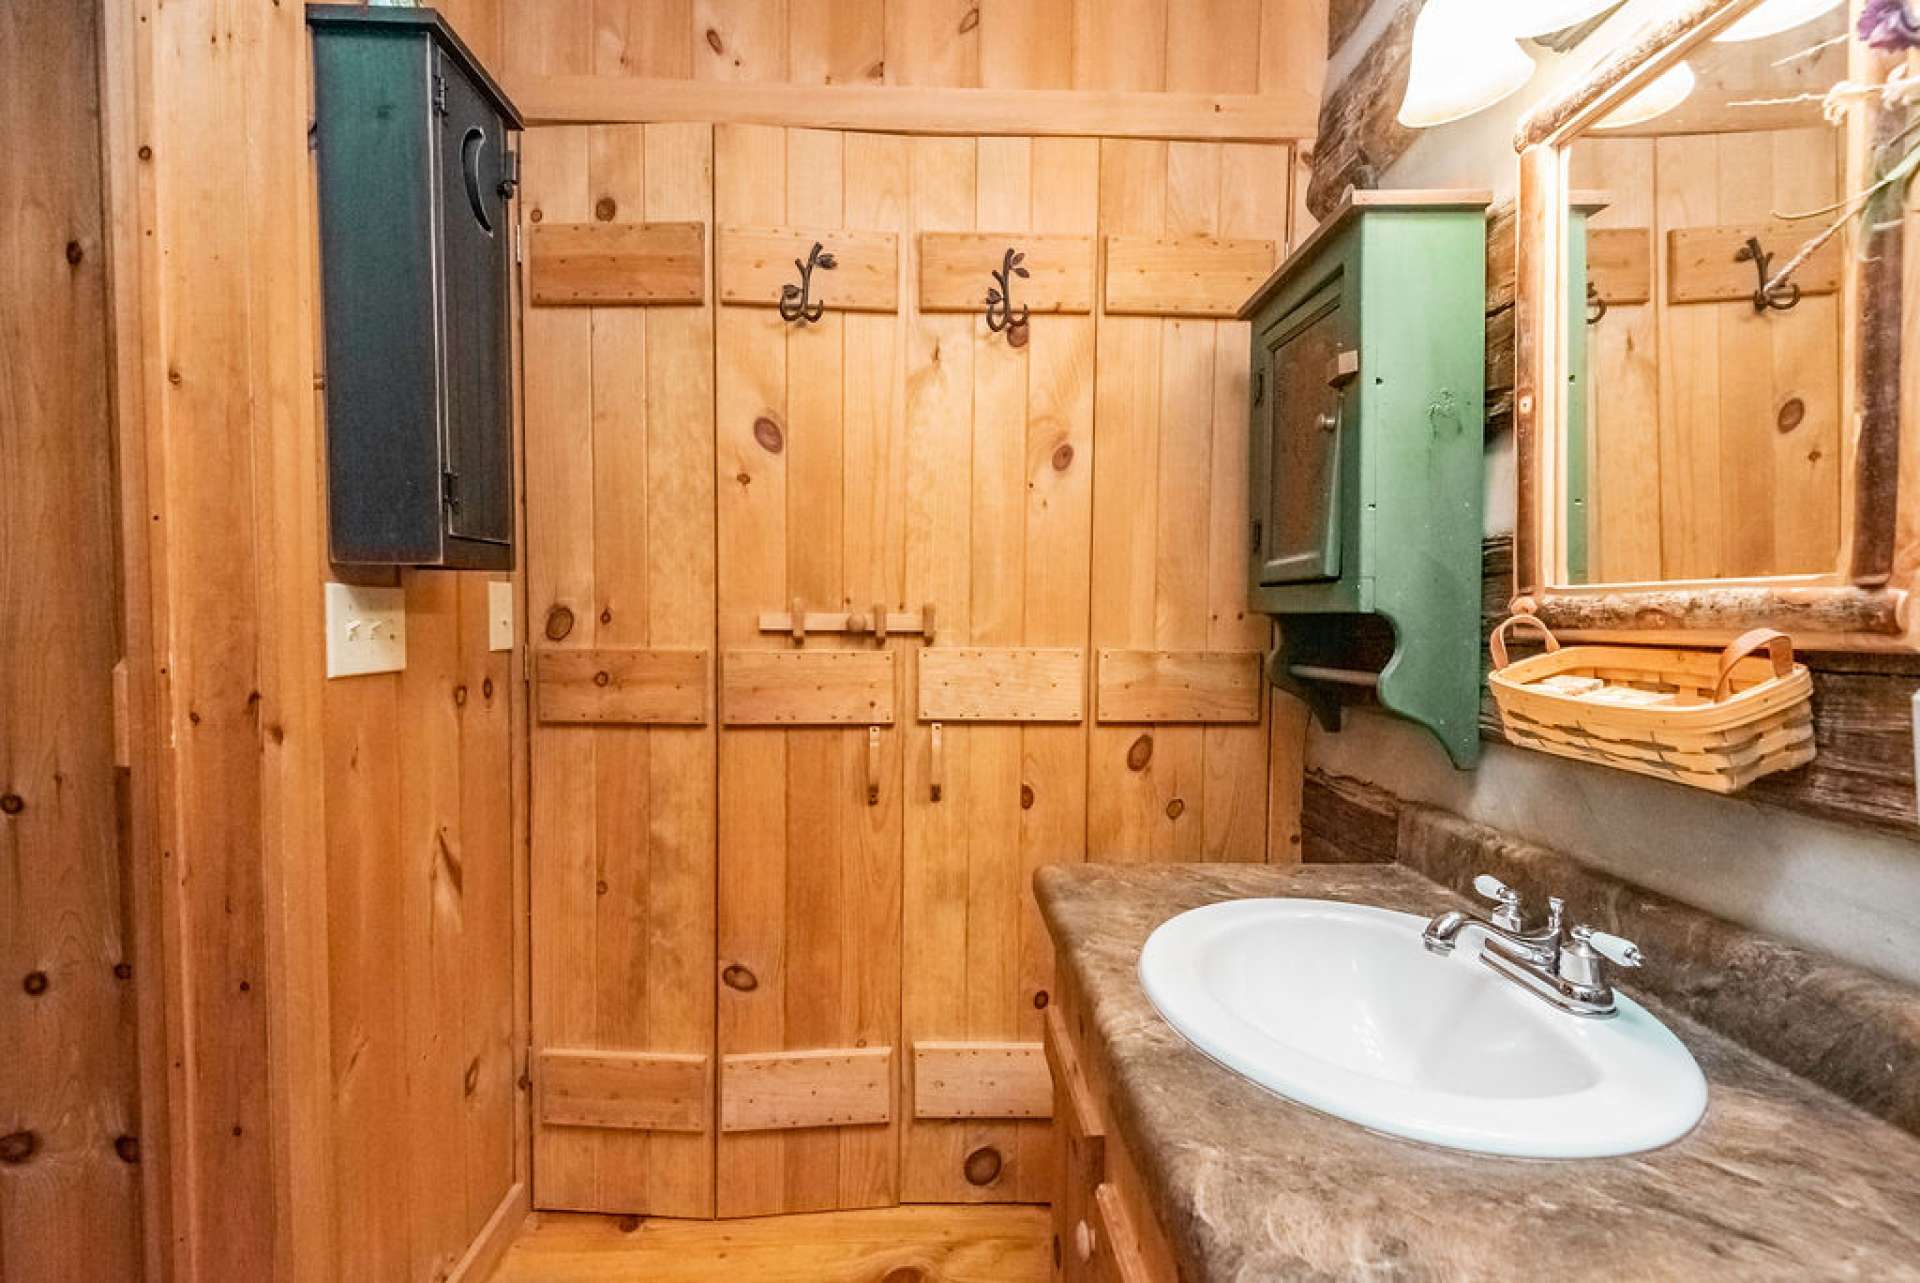 Laundry closet is located in this bathroom for convenience.